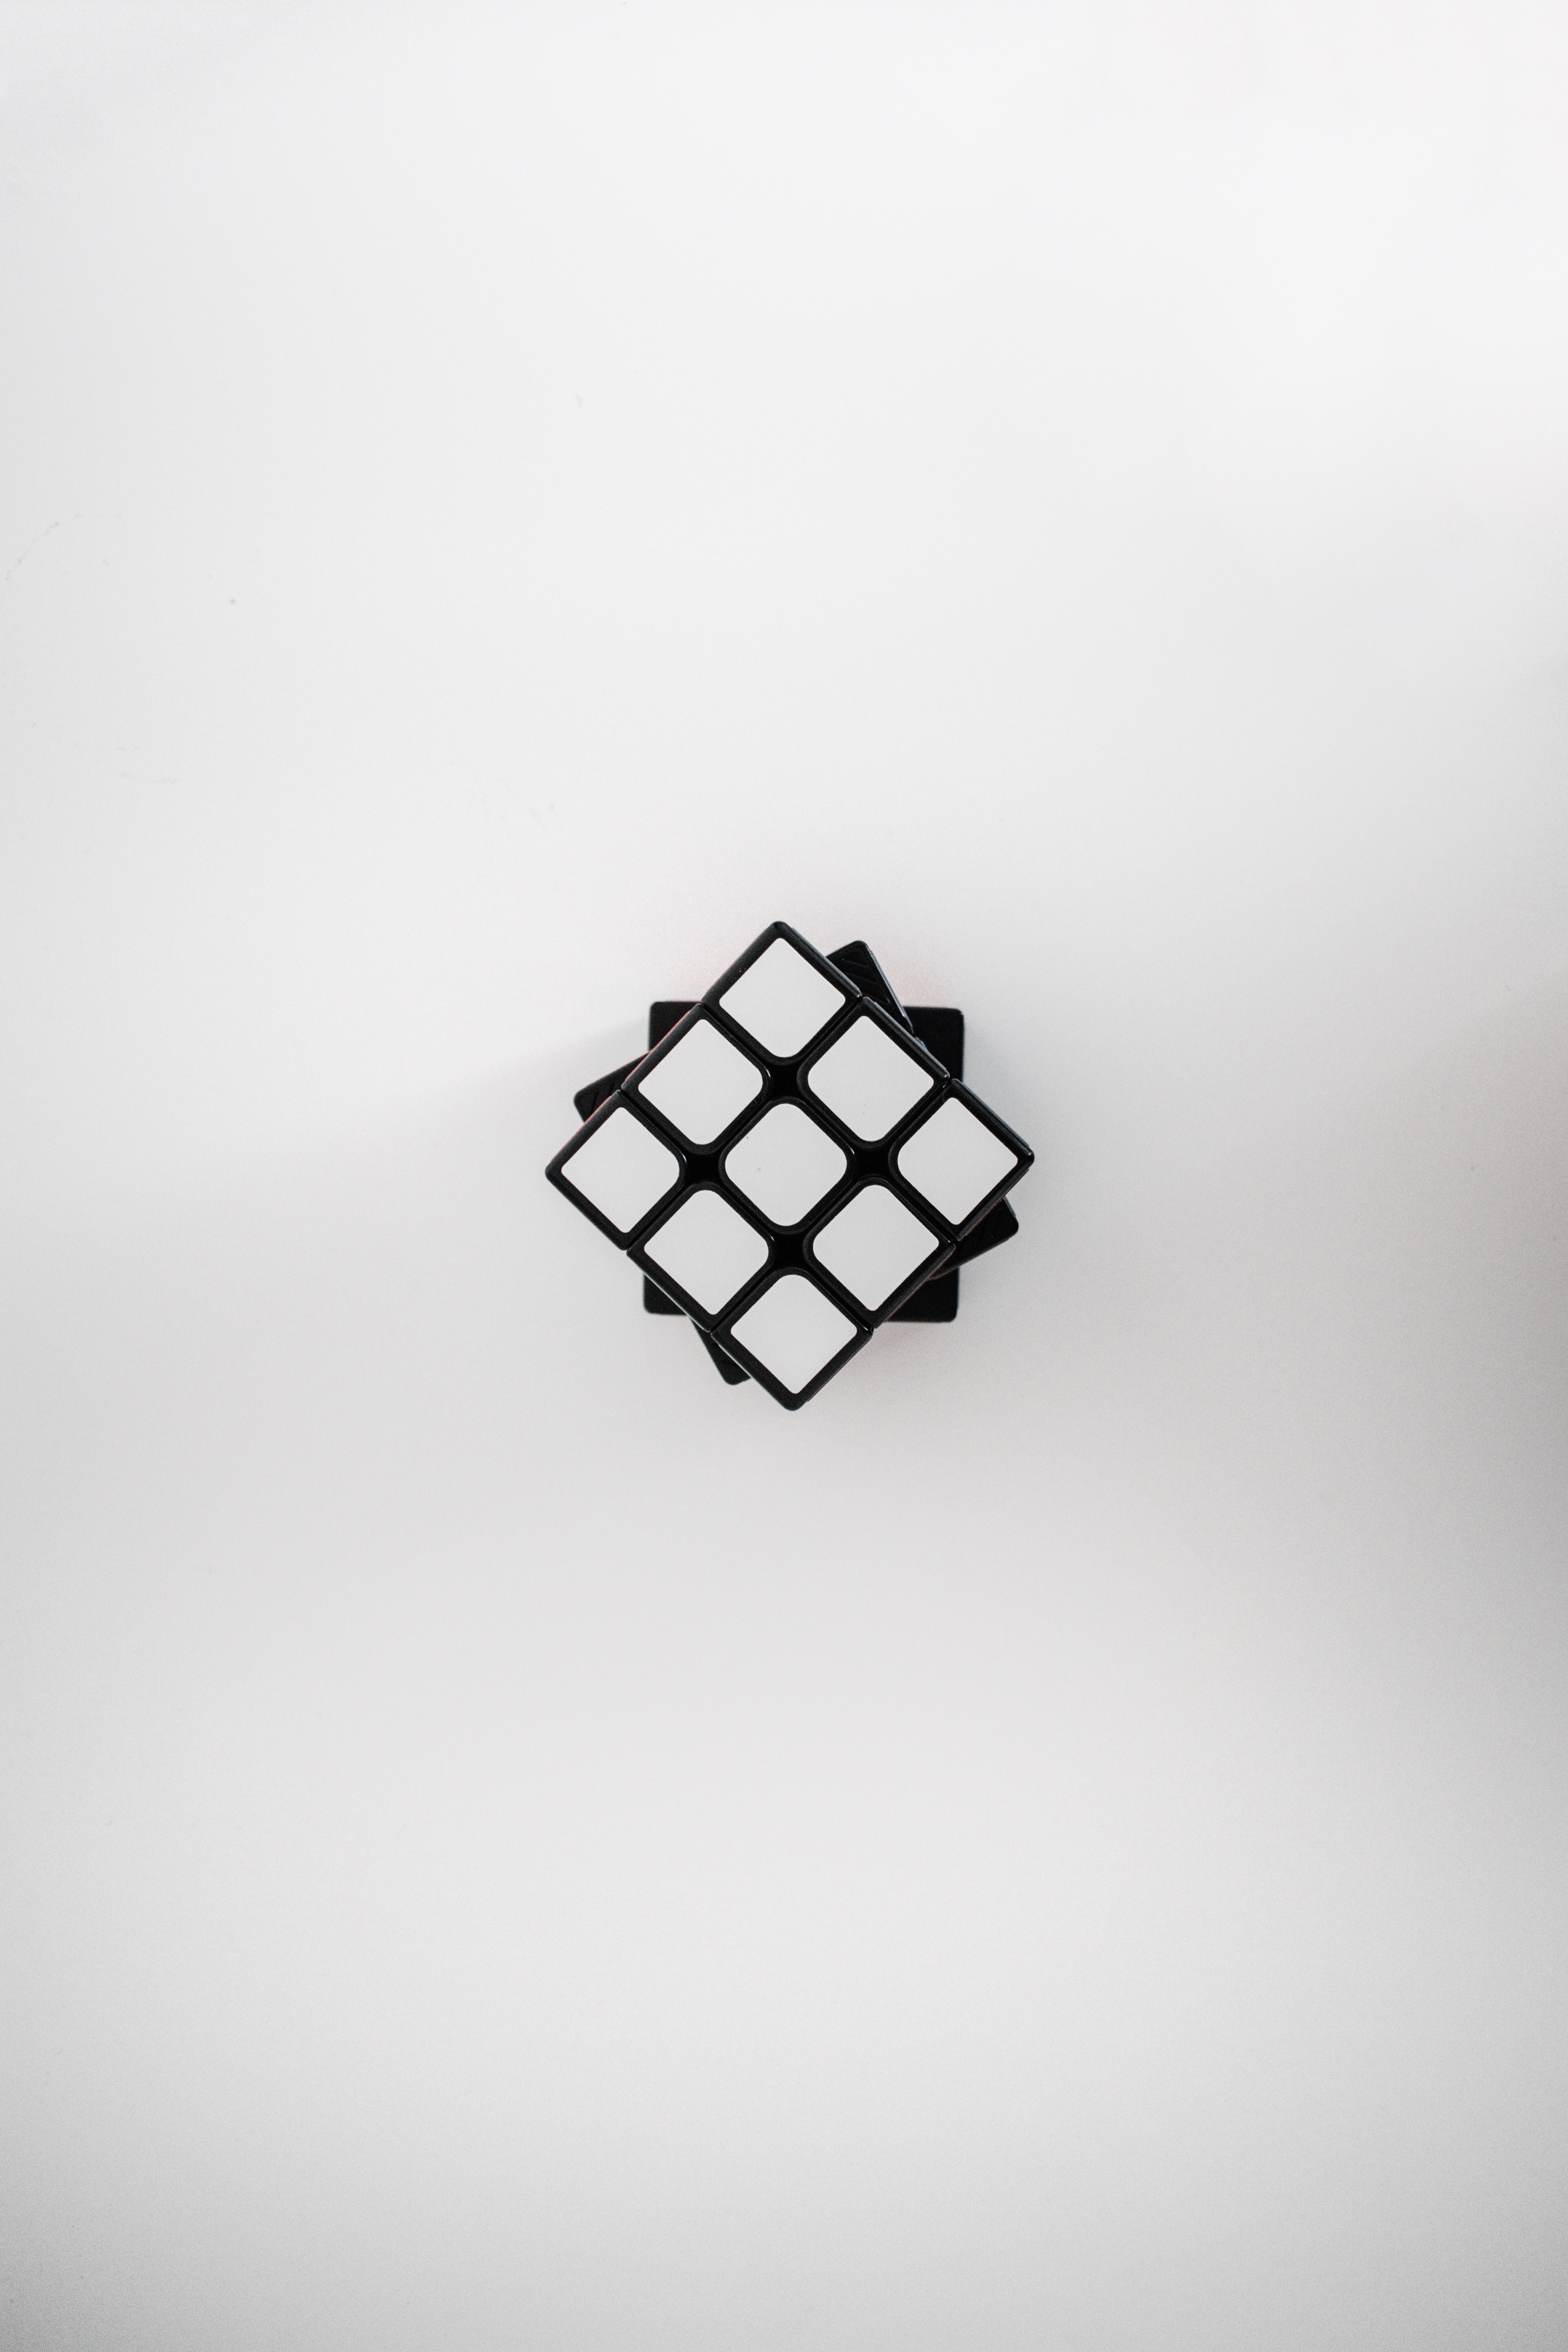 cube, rubik's cube, miscellanea, white, view from above, miscellaneous